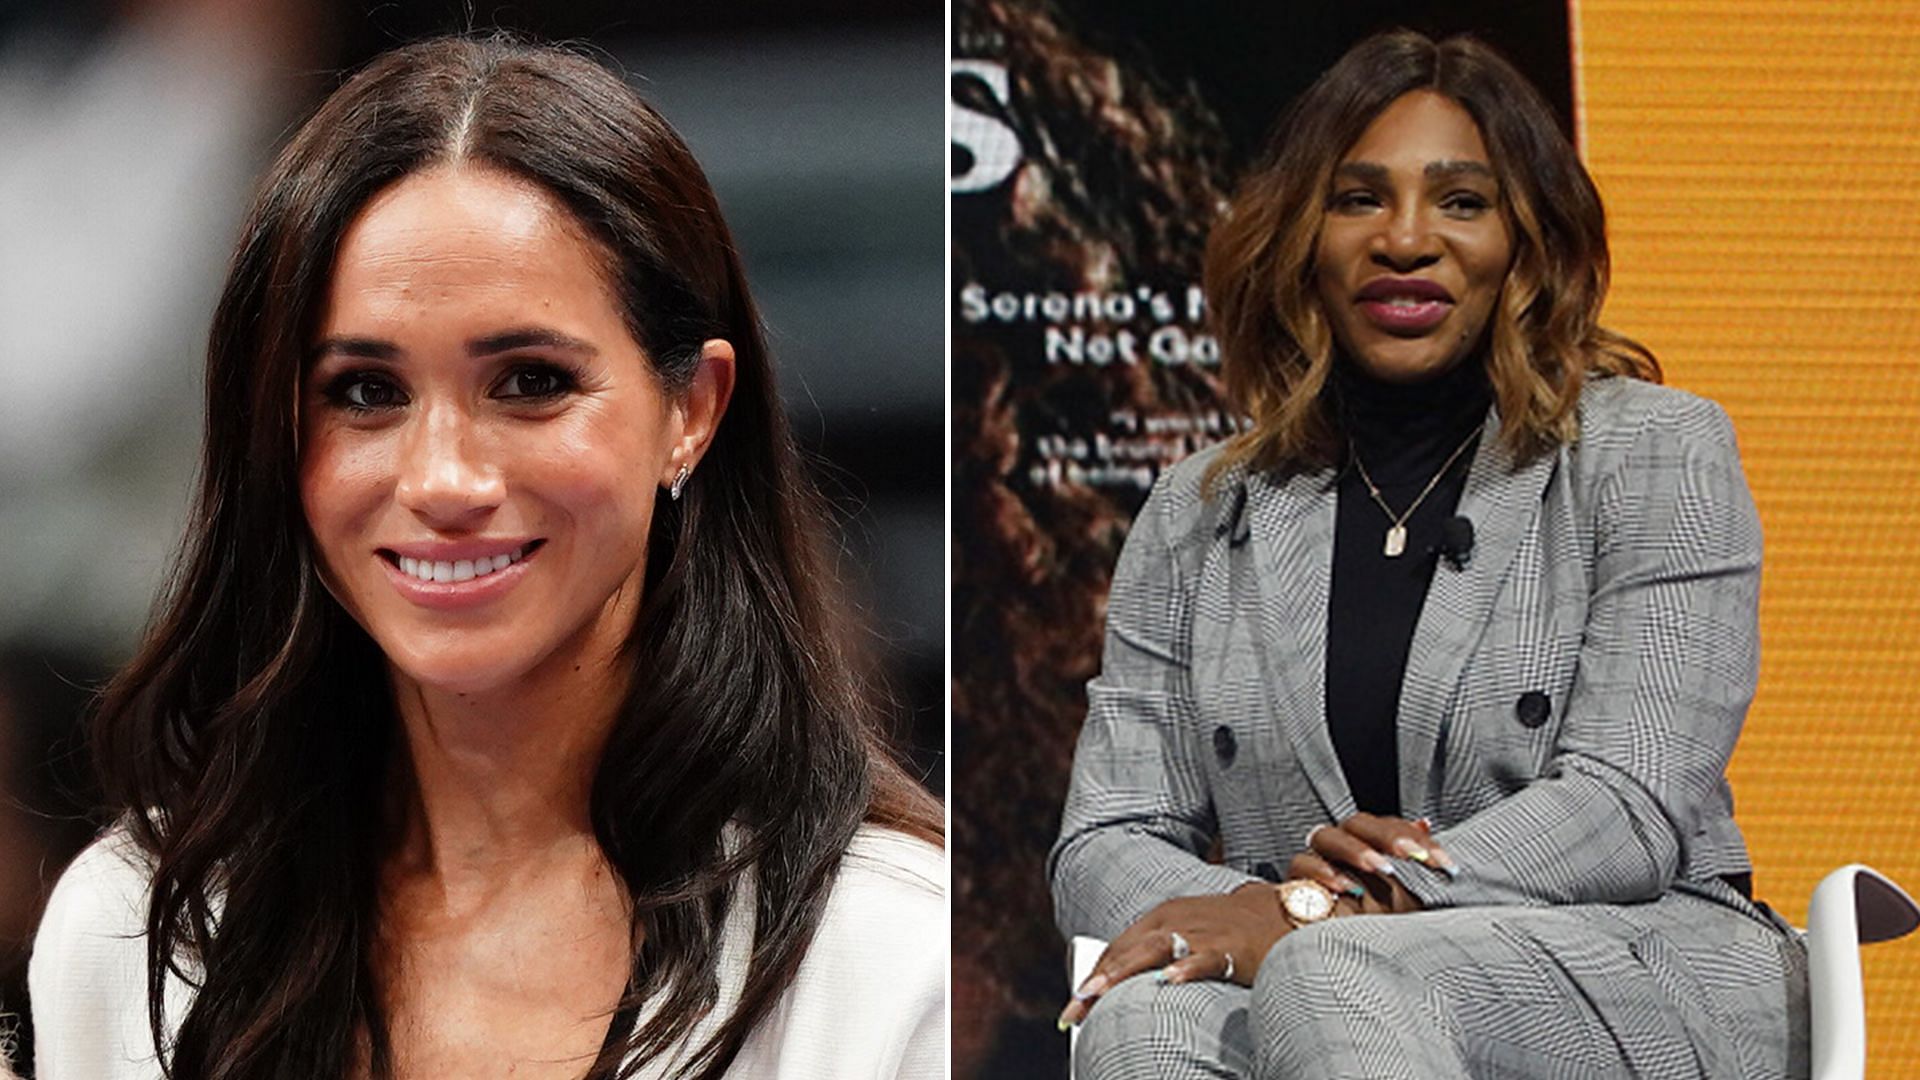 Meghan Markle (L) and Serena Williams (R)